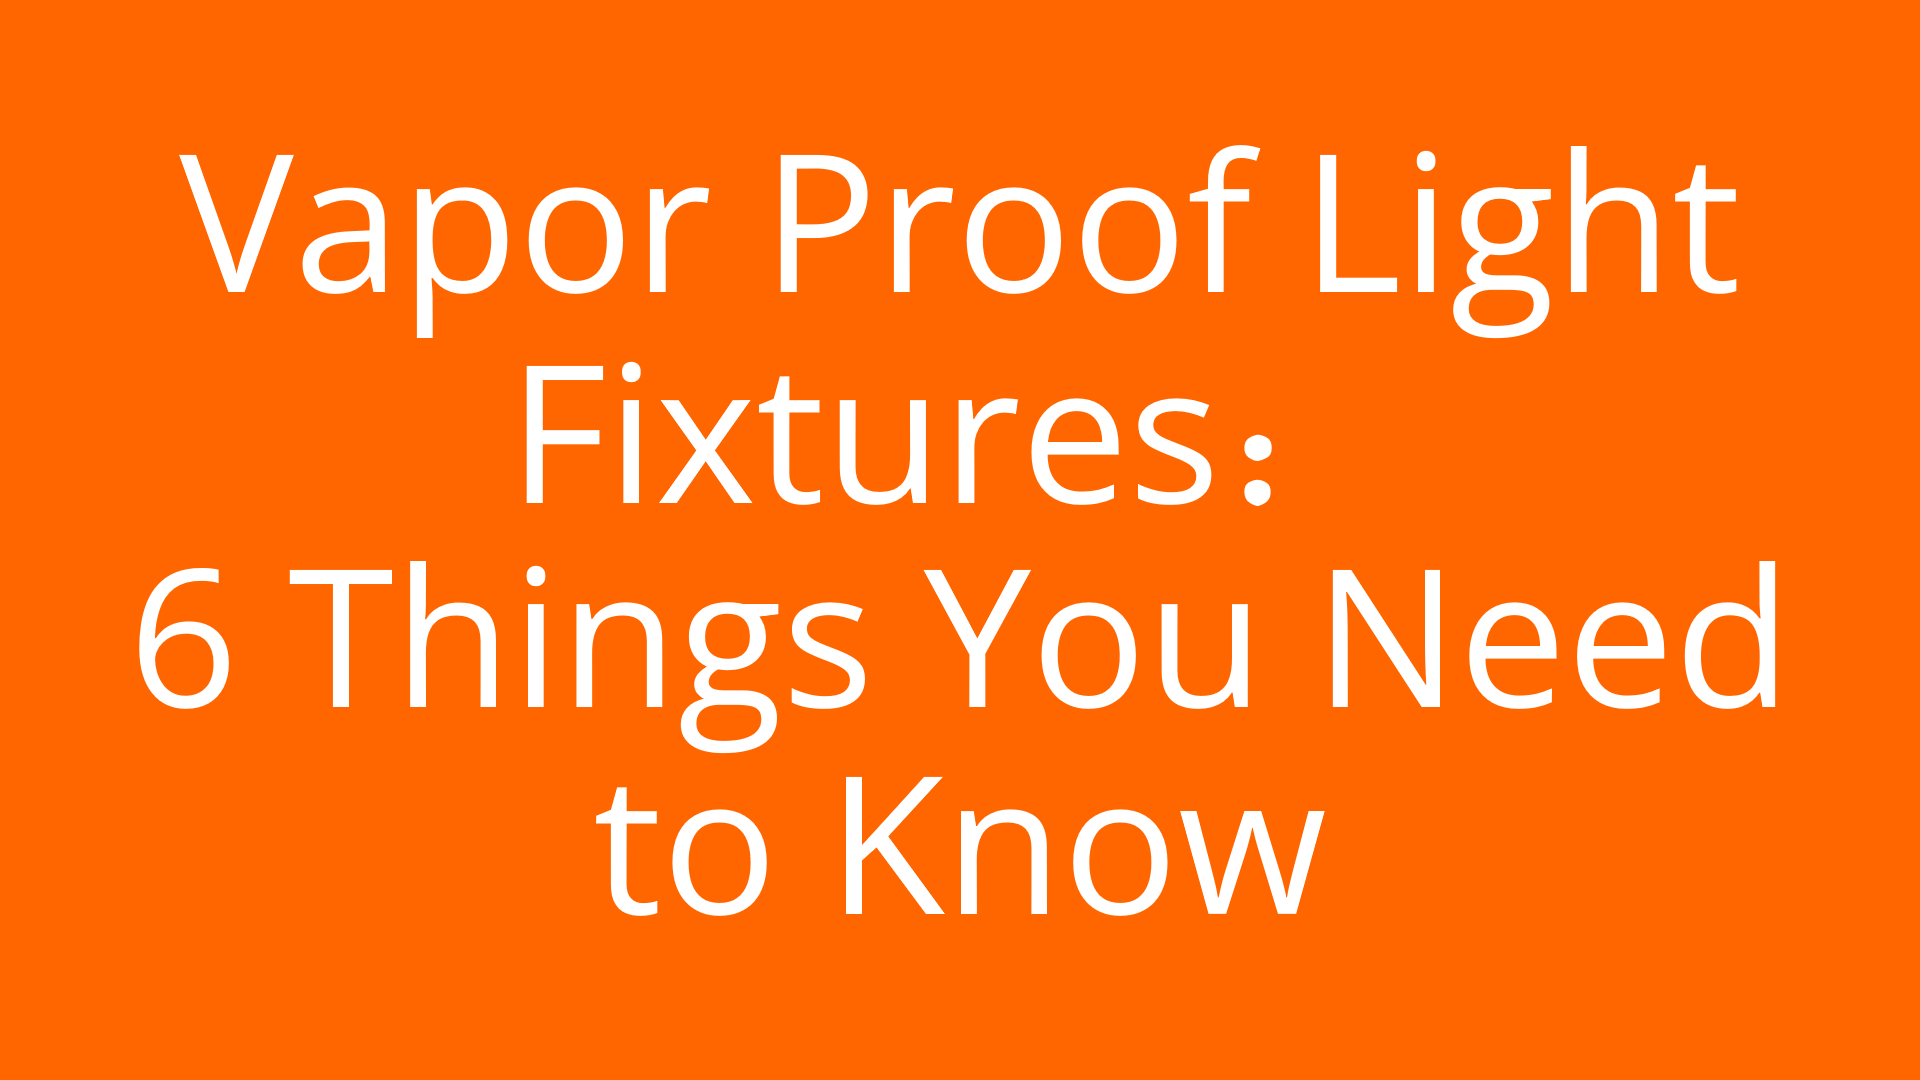 Vapor Proof Light Fixtures : 6 Things You Need to Know